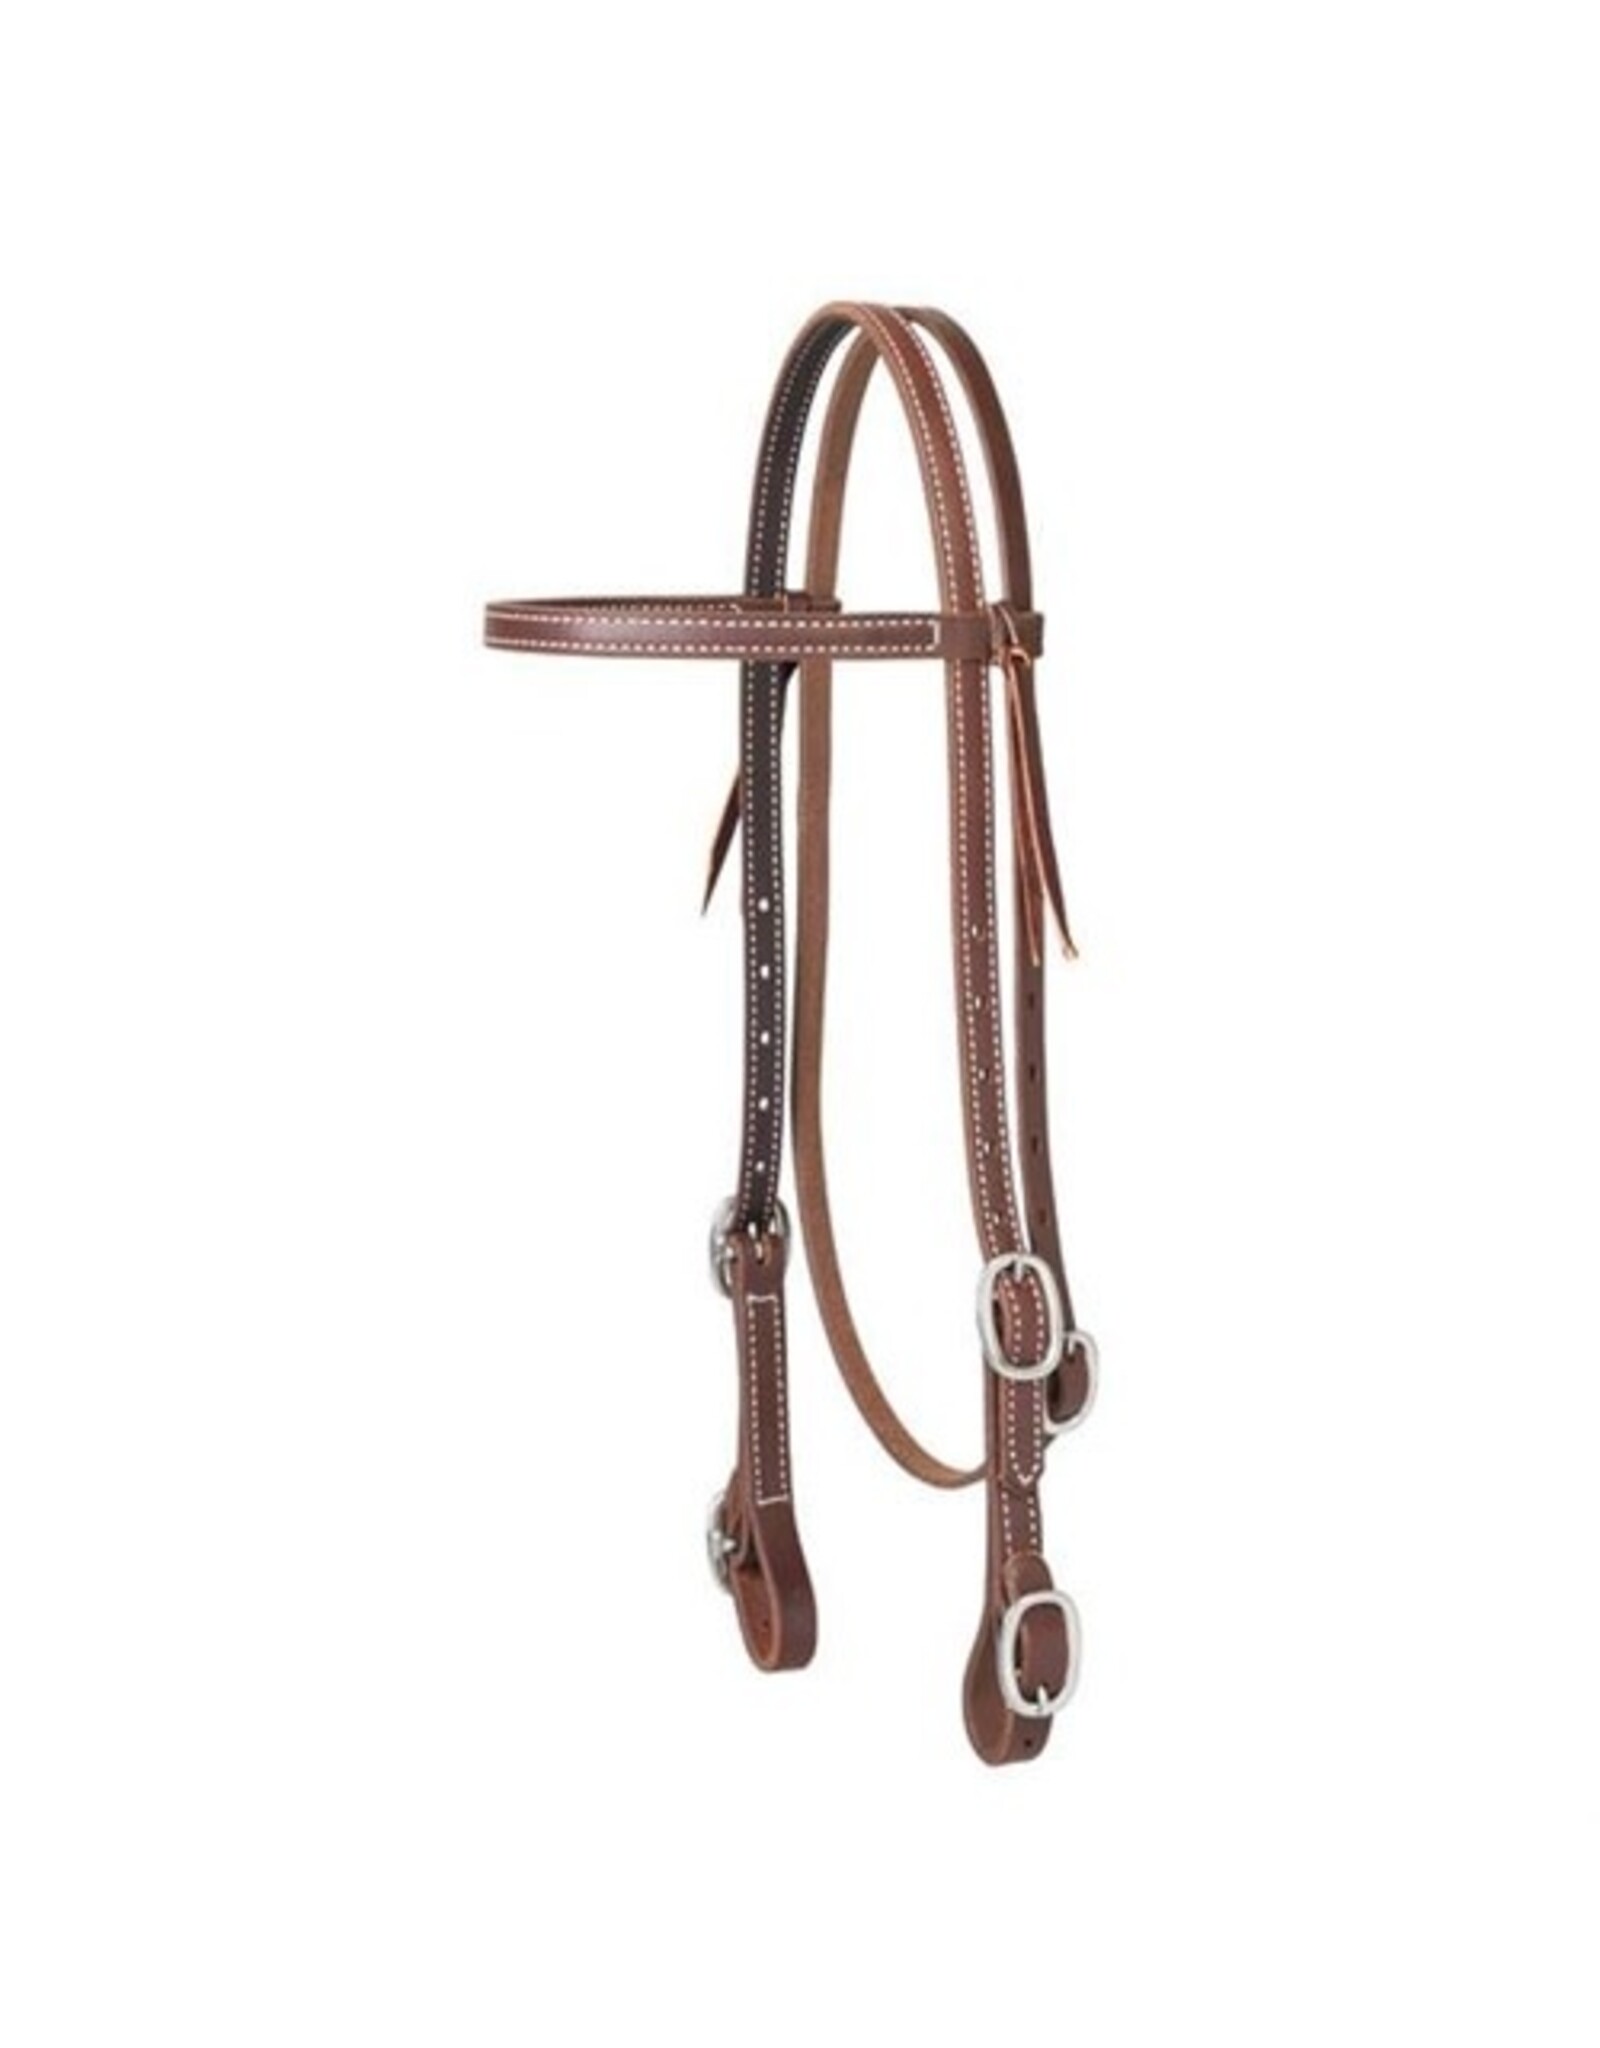 Working Tack Browband Headstall with Buckle Bit Ends - 10-0517